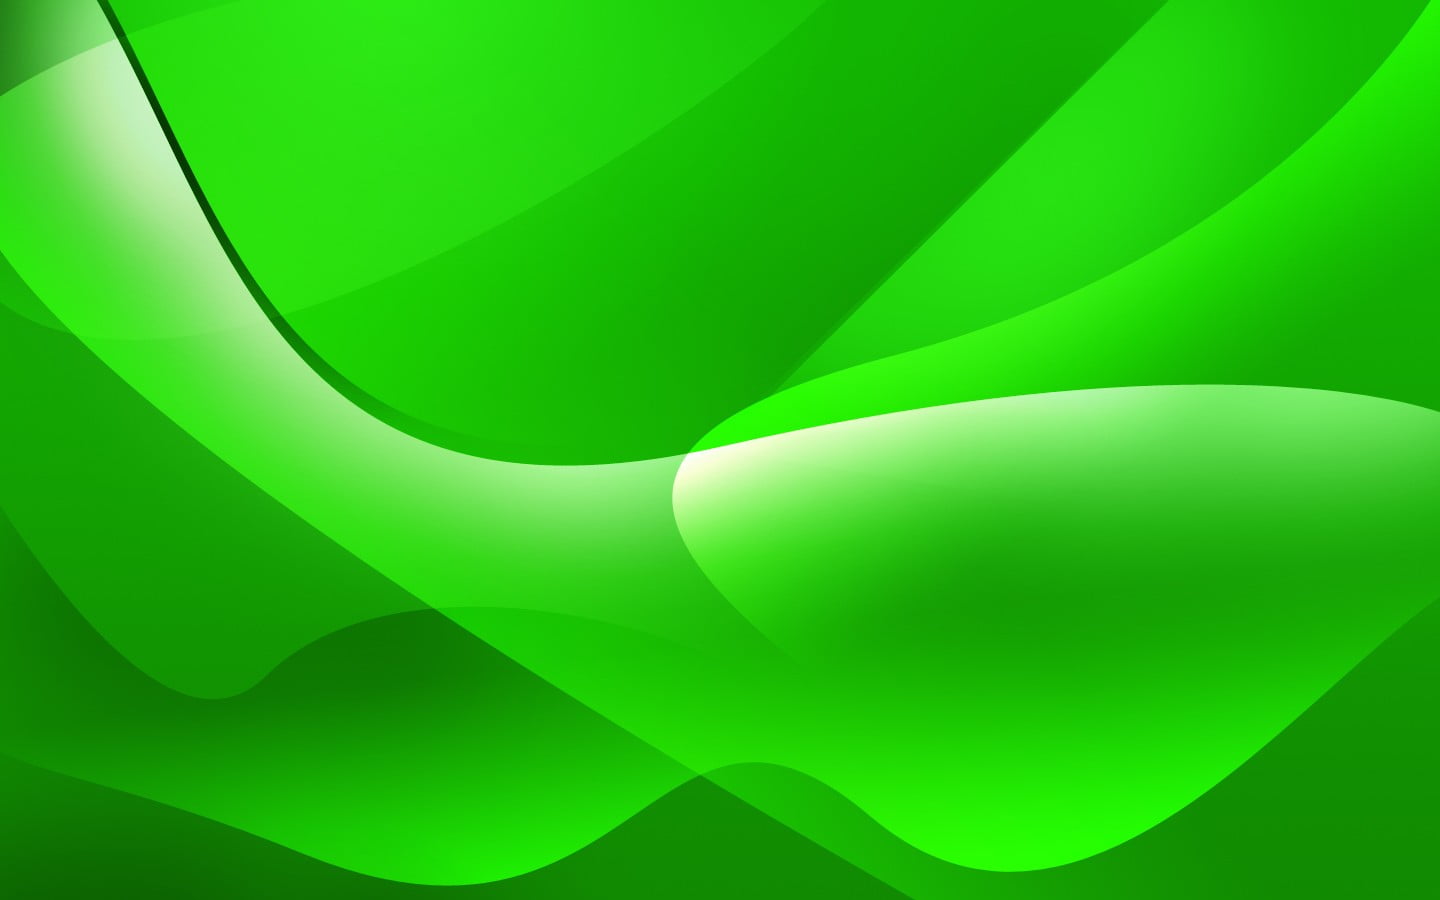 green wallpaper, abstract, shapes, green color, backgrounds, pattern